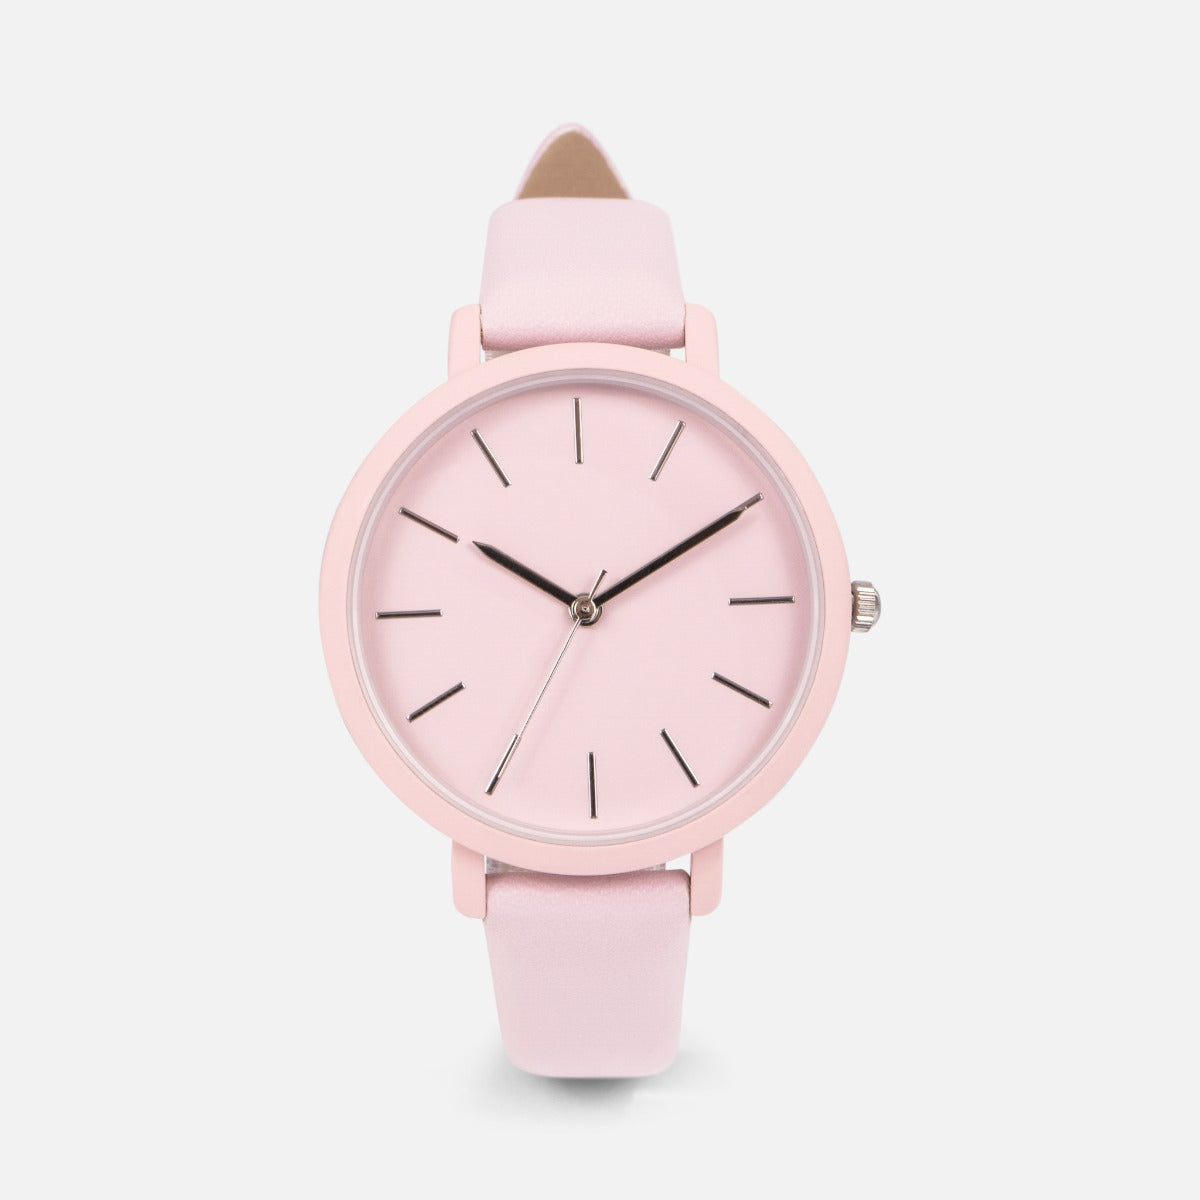 Innova collection - pink watch with matte case   